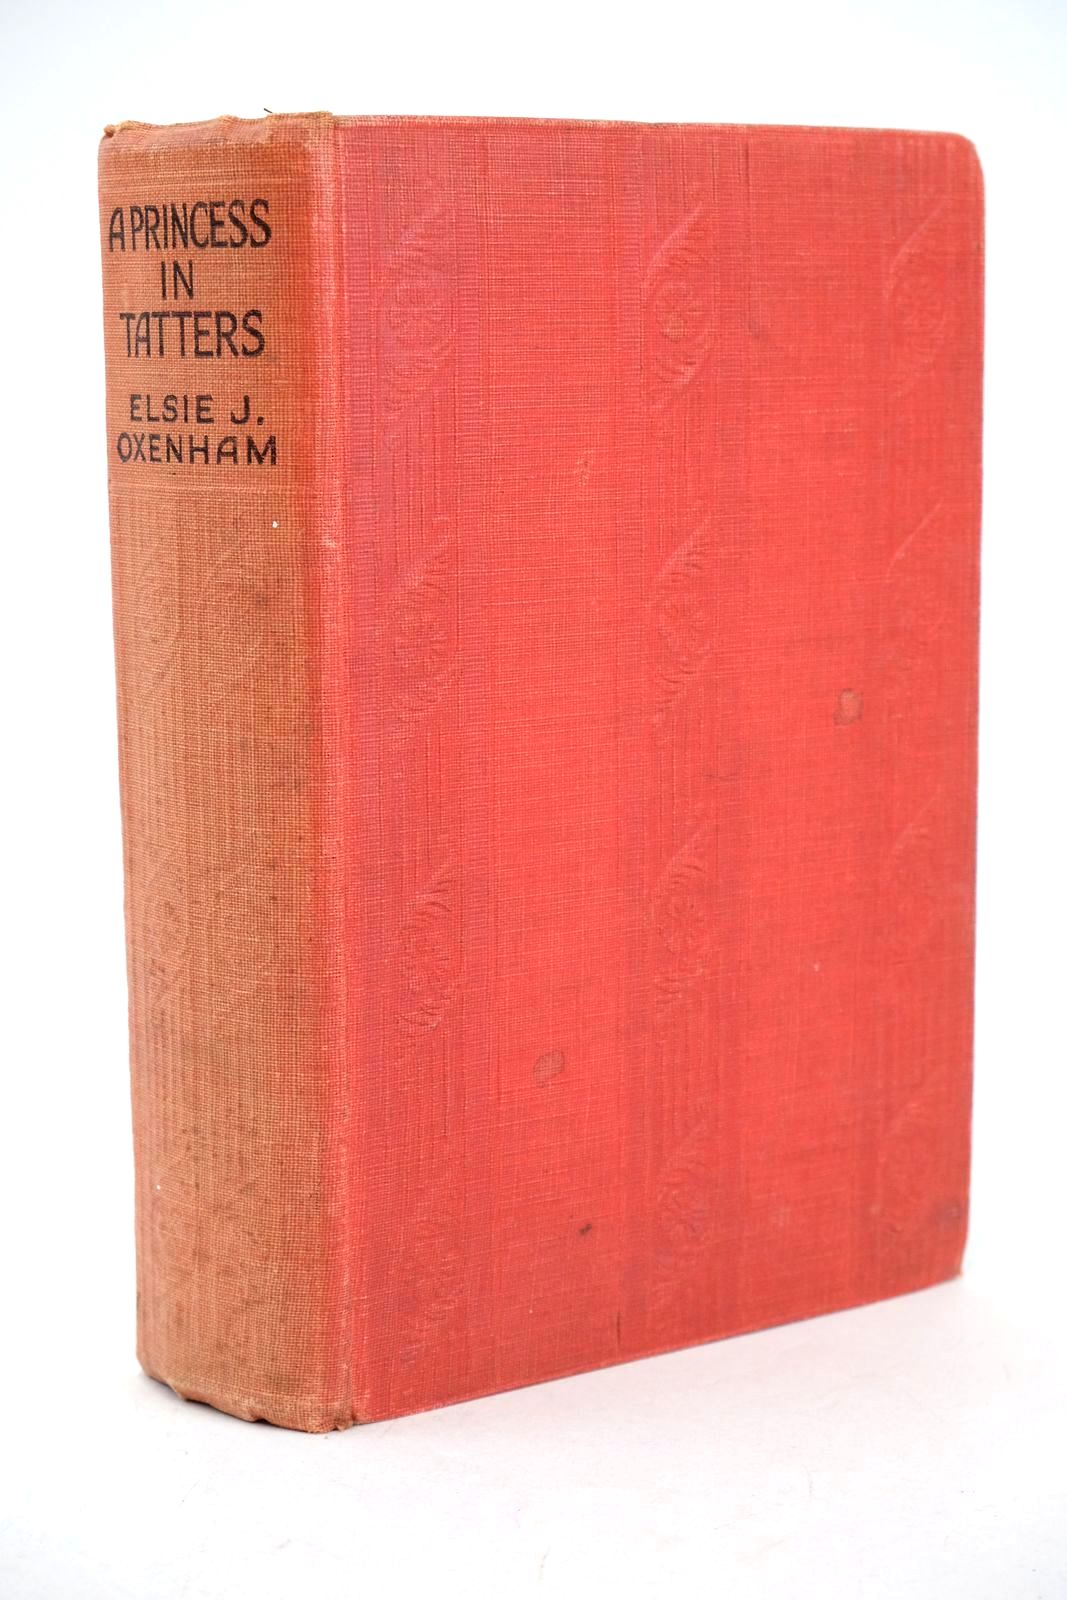 Photo of A PRINCESS IN TATTERS written by Oxenham, Elsie J. published by Collins Clear-Type Press (STOCK CODE: 1326853)  for sale by Stella & Rose's Books